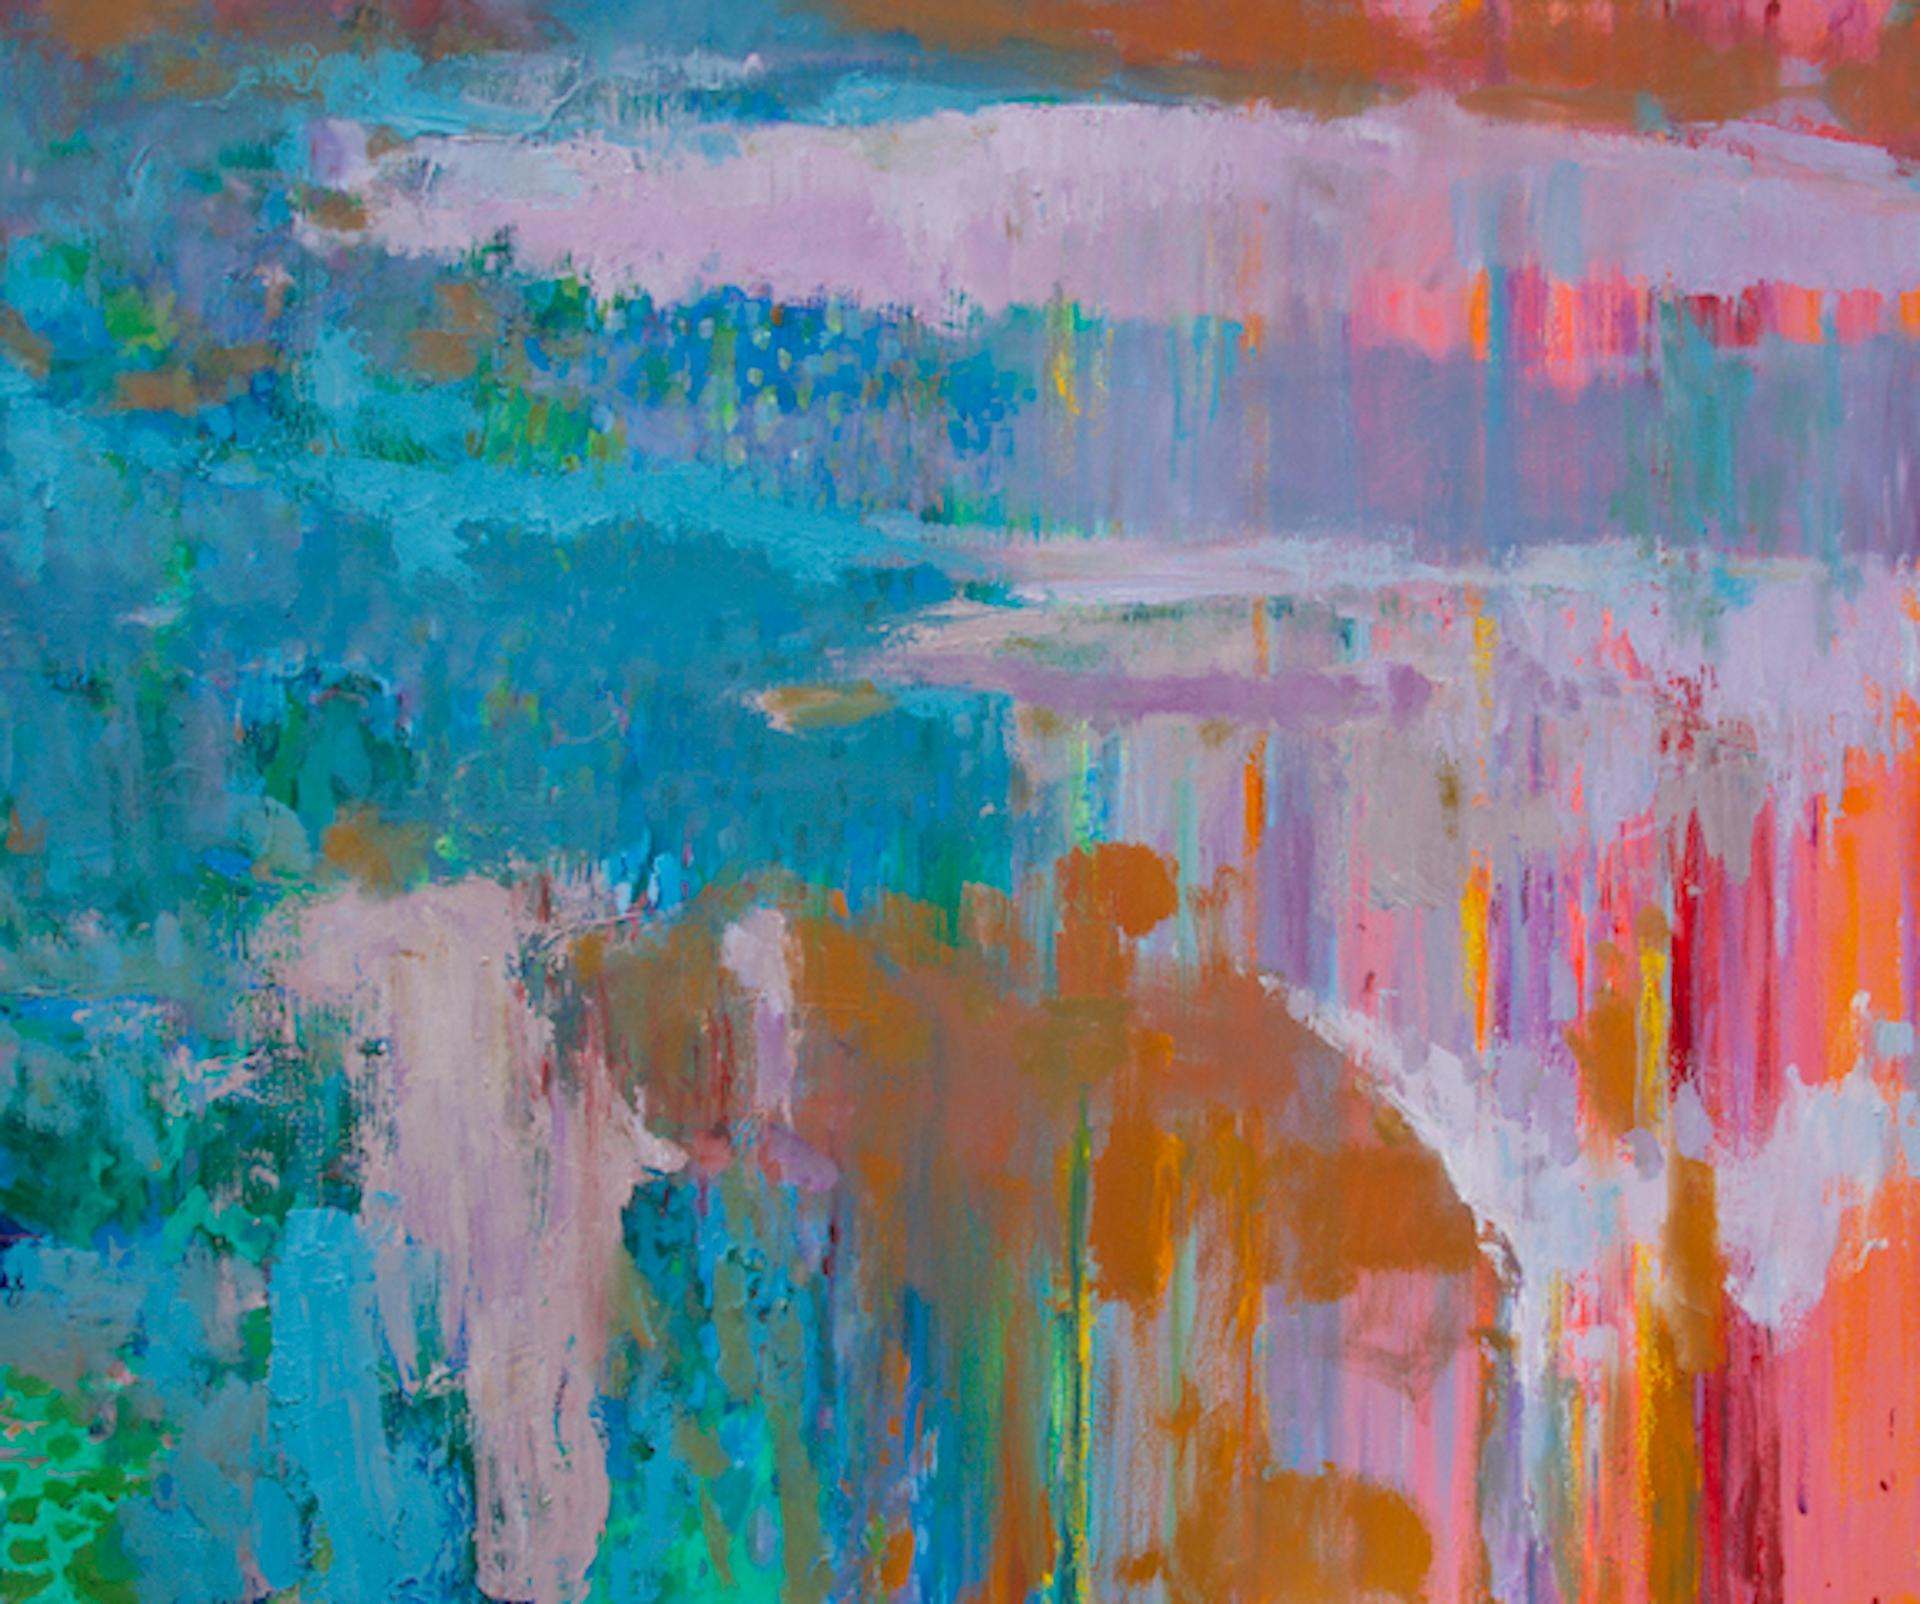 Teresa Pemberton Landscape Painting - Light on Water, Gerhard Richter Style Abstract Expressionist Waterscape Painting